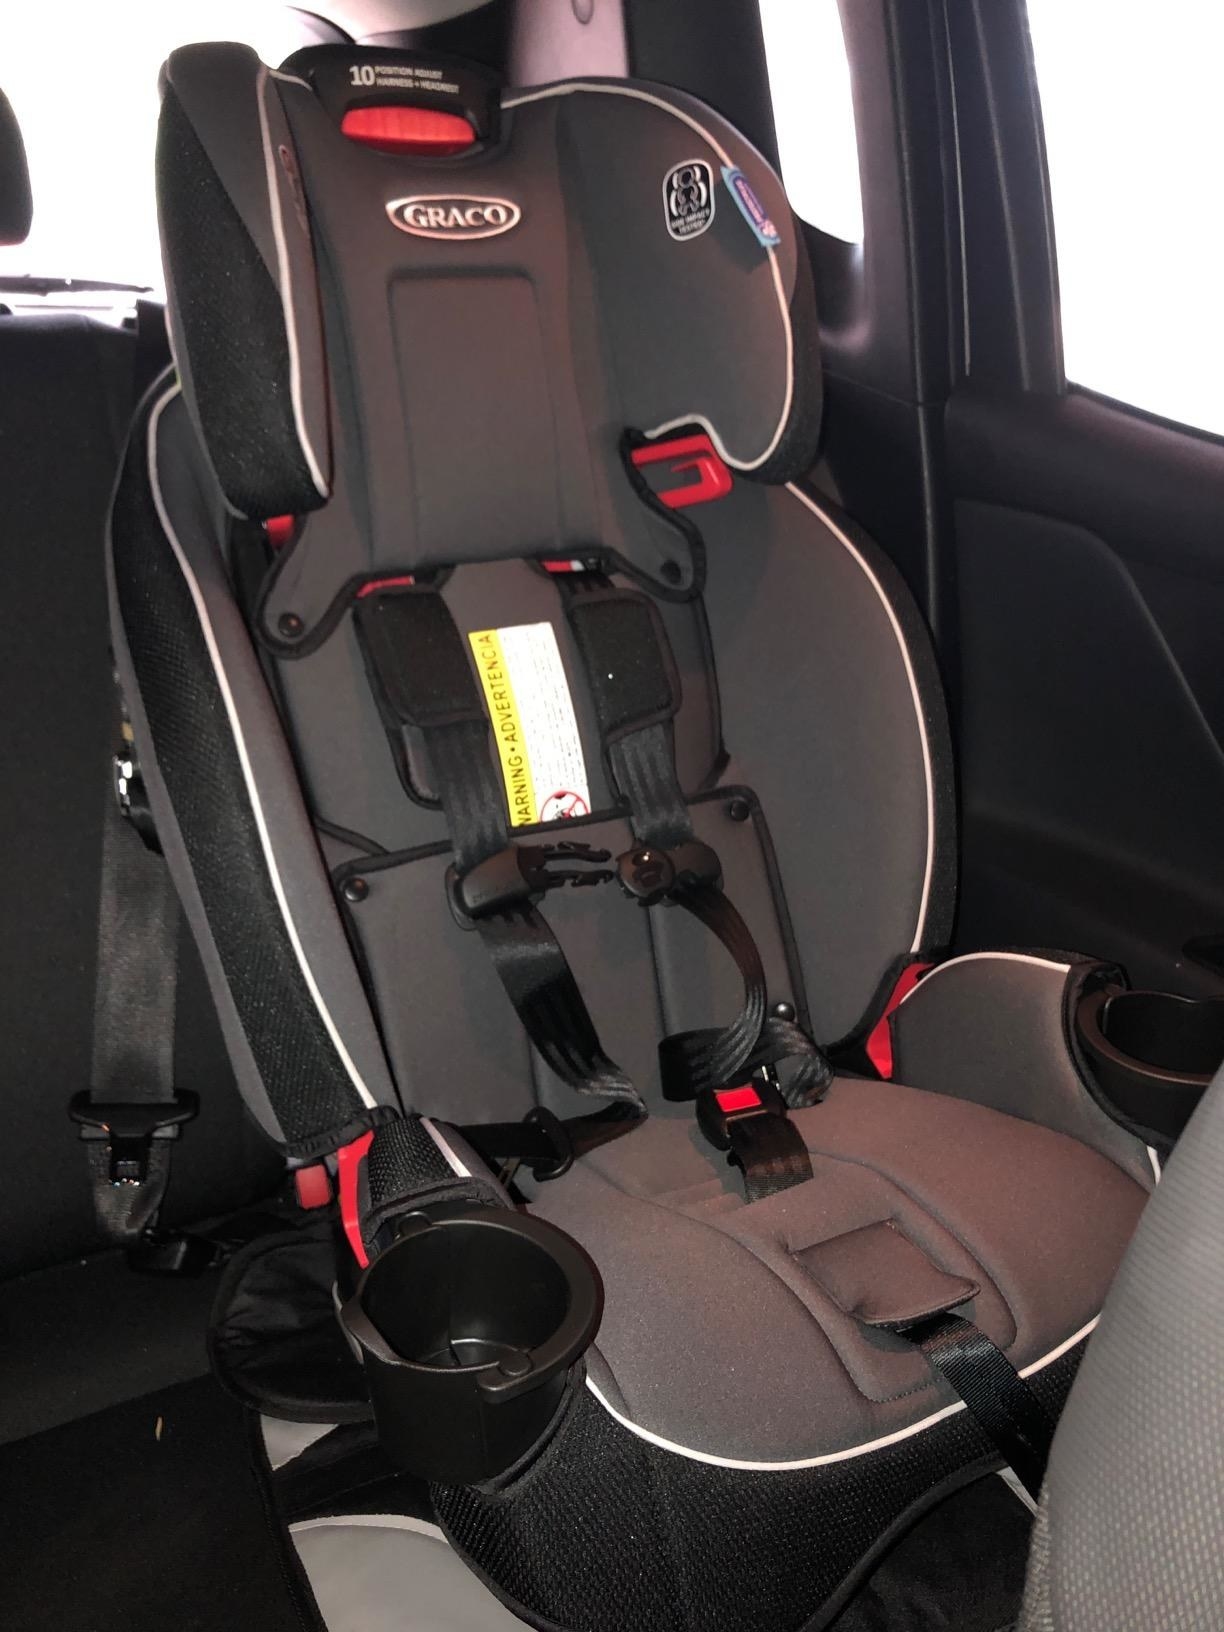 reviewer image of the Slim Fit Graco car seat installed in a car